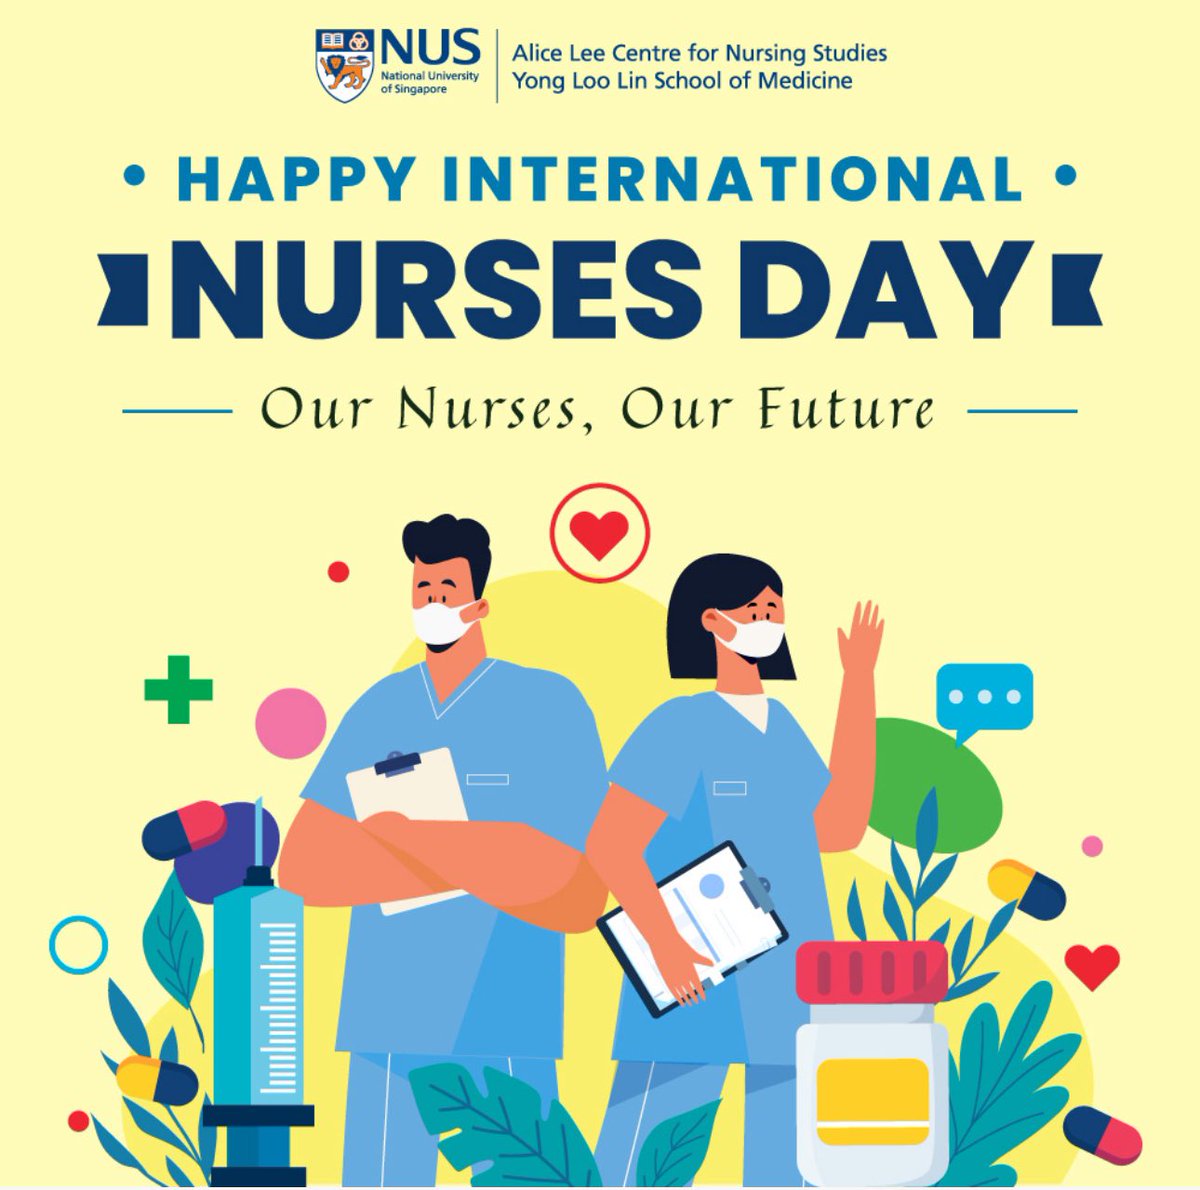 “Our Nurses. Our Future.” - This year's International Nurses’ Day theme reflects NUS Nursing's ongoing commitment to equip our students with the relevant skills for #healthcare challenges ahead.